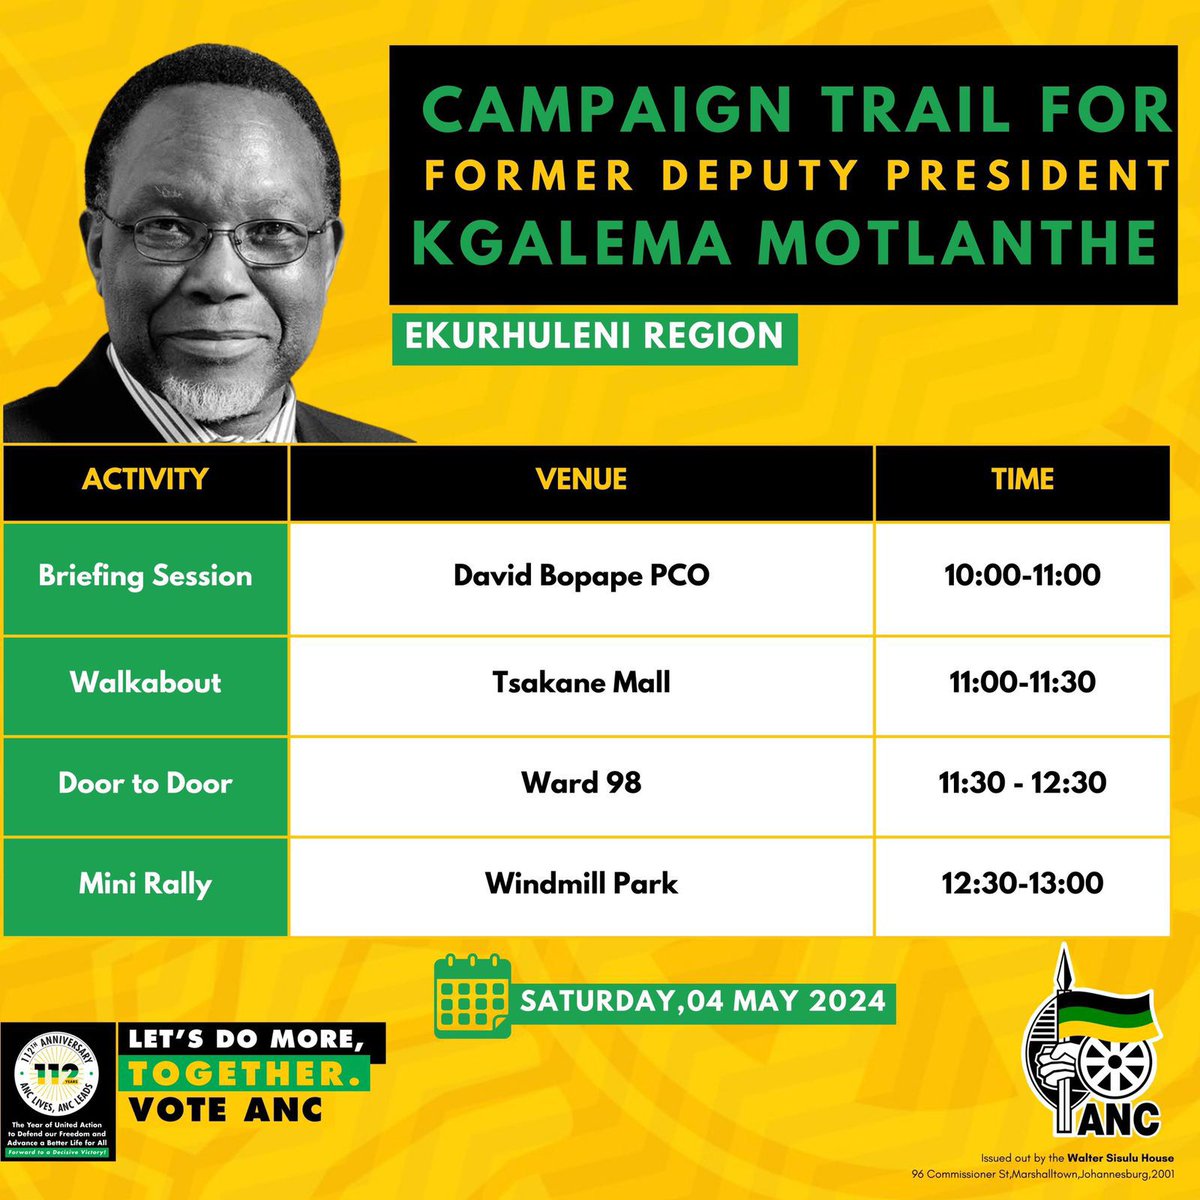 BREAKING NEWS: Deputy President Kgalema Motlanthe hits the campaign trail! Former President of the RSA, Kgalema 'Mkhuluwa' Motlanthe, will tomorrow be on the ground in Ekurhuleni, requesting people to vote for the ANC. ANC victory is CERTAIN! #VoteANC2024 #LetsDoMoreTogether